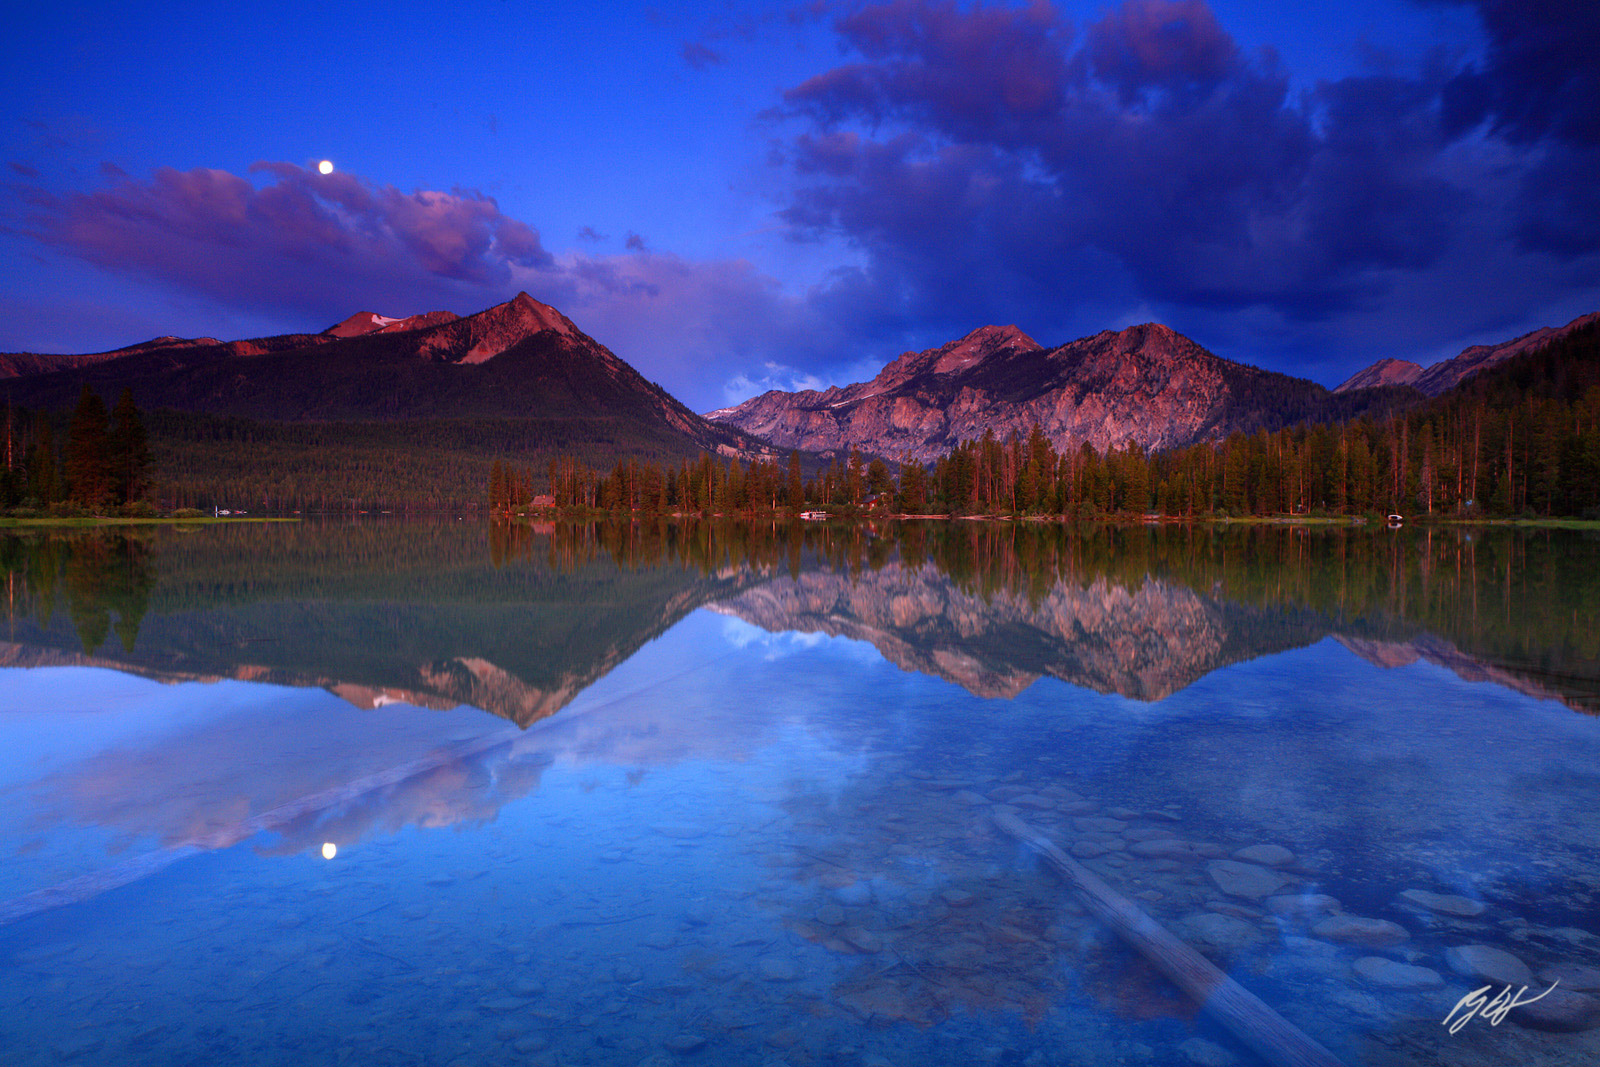 Sunrise Reflections in Pettit Lake in the Sawtooth Wilderness in Idaho